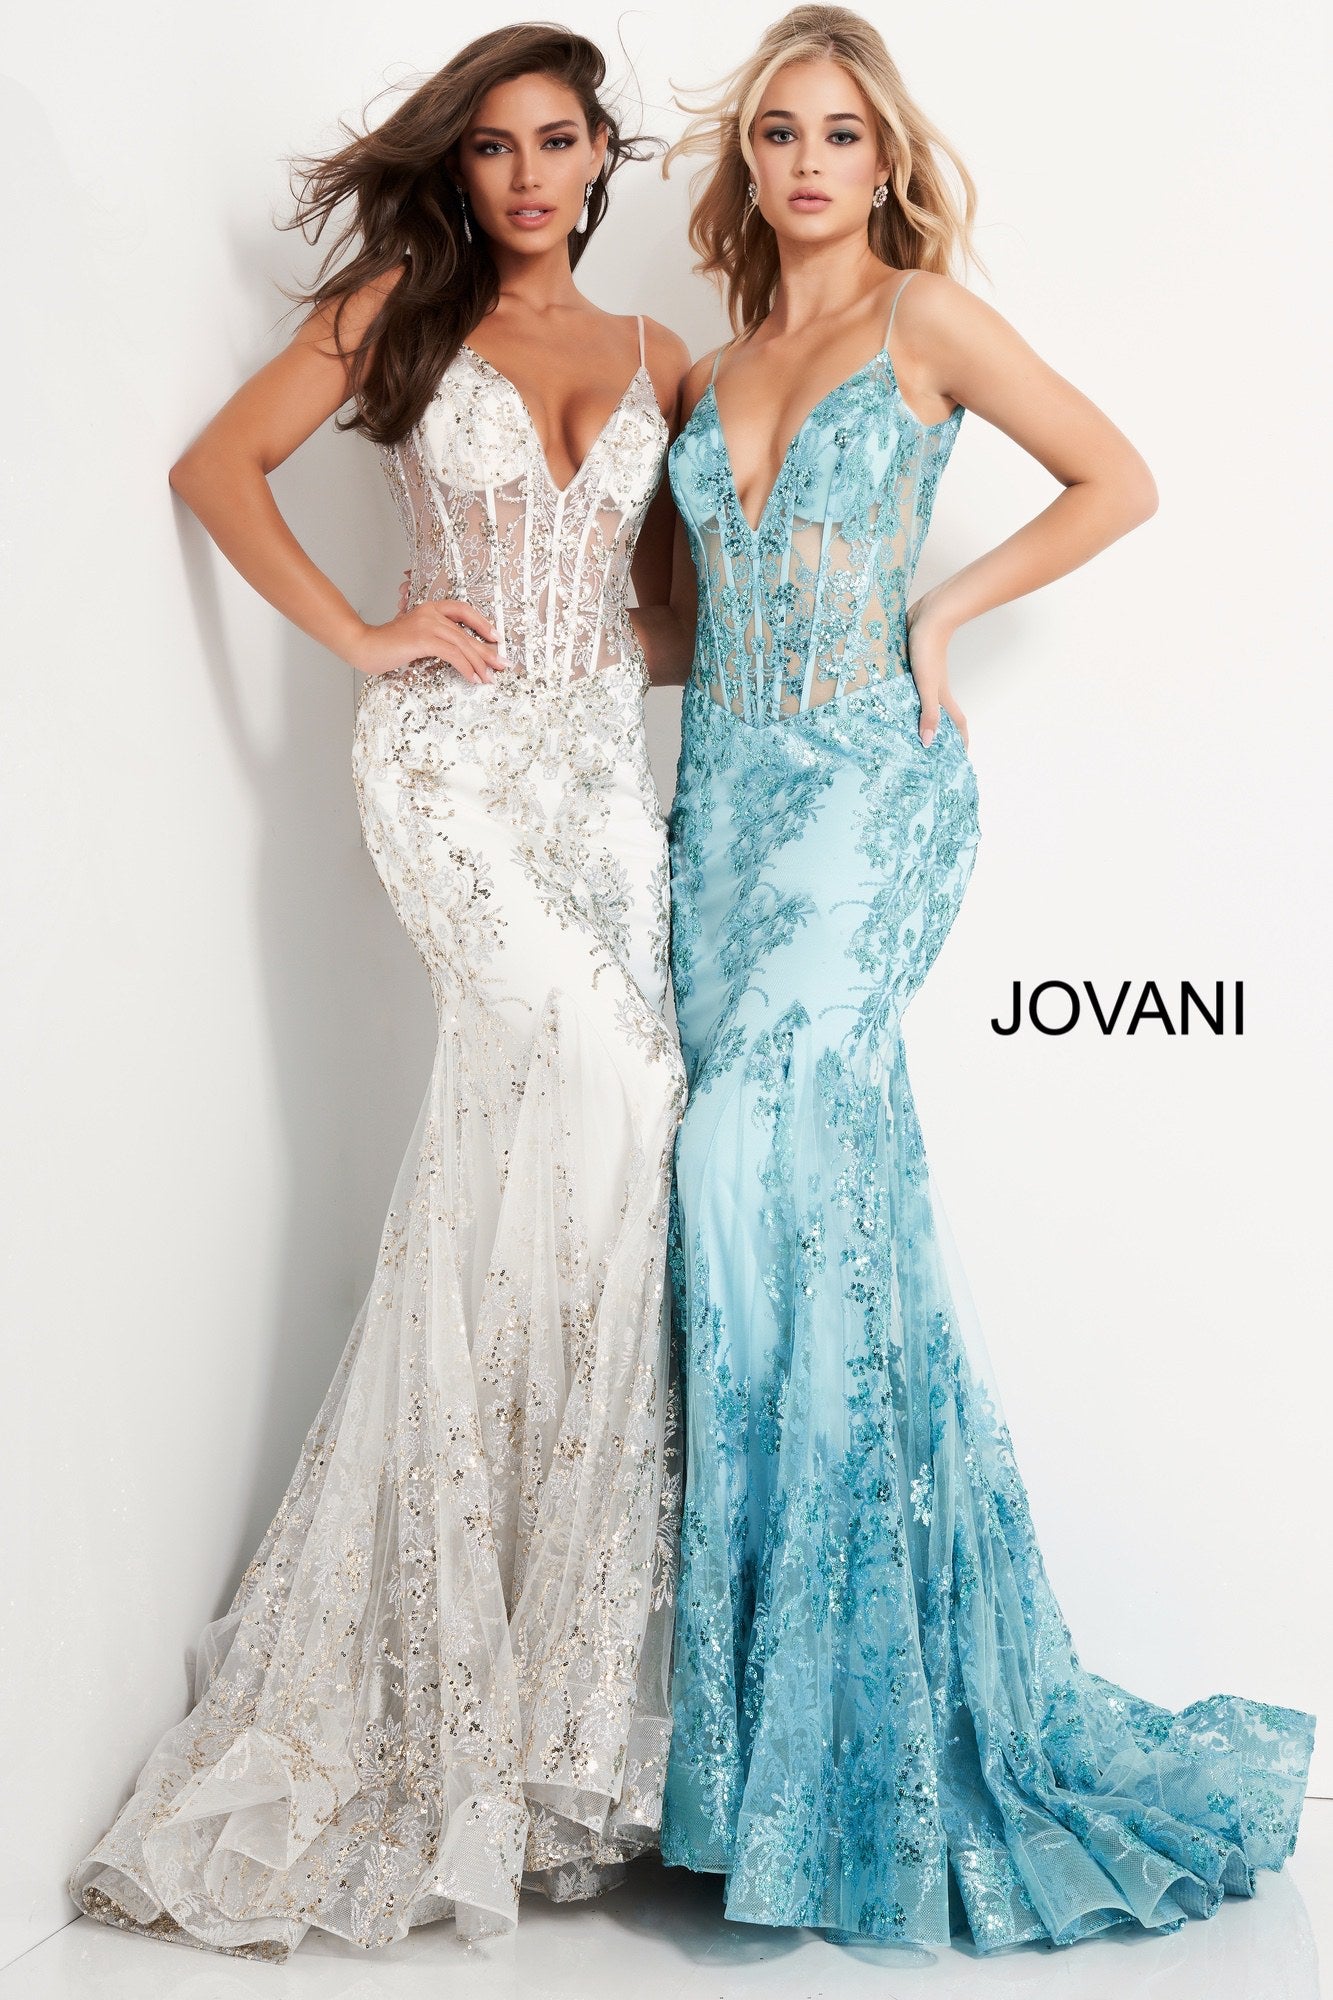 Jovani 3675 Long Prom Dress Sheer Corset Shimmer Mermaid Pageant Gown Embellished form fitting prom dress, floor length with slightly flare bottom, sheer bodice with boning, sleeveless, plunging neckline, spaghetti straps over shoulders, V back. Prom Dresses, Pink Prom Dresses, Corset Dresses, Illusion Dresses, Mermaid Prom Dresses, Sequin Prom Dresses, Sexy Prom Dresses, V Neck Prom Dresses, Long Prom Dresses, Blush Dresses Glass Slipper Formals